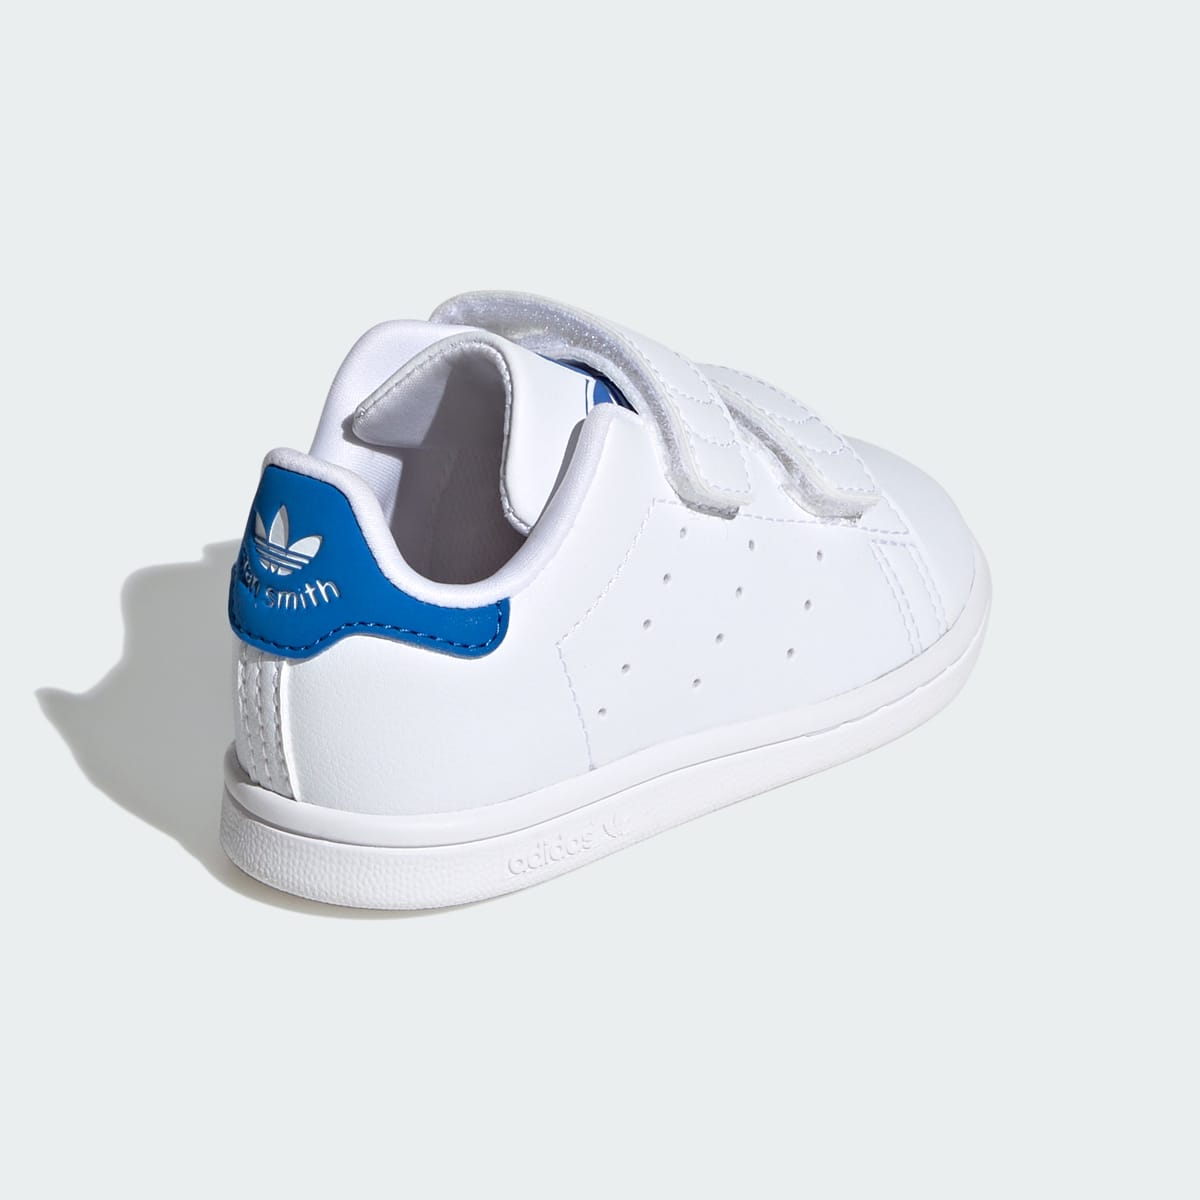 Adidas Stan Smith Comfort Closure Shoes Kids. 6